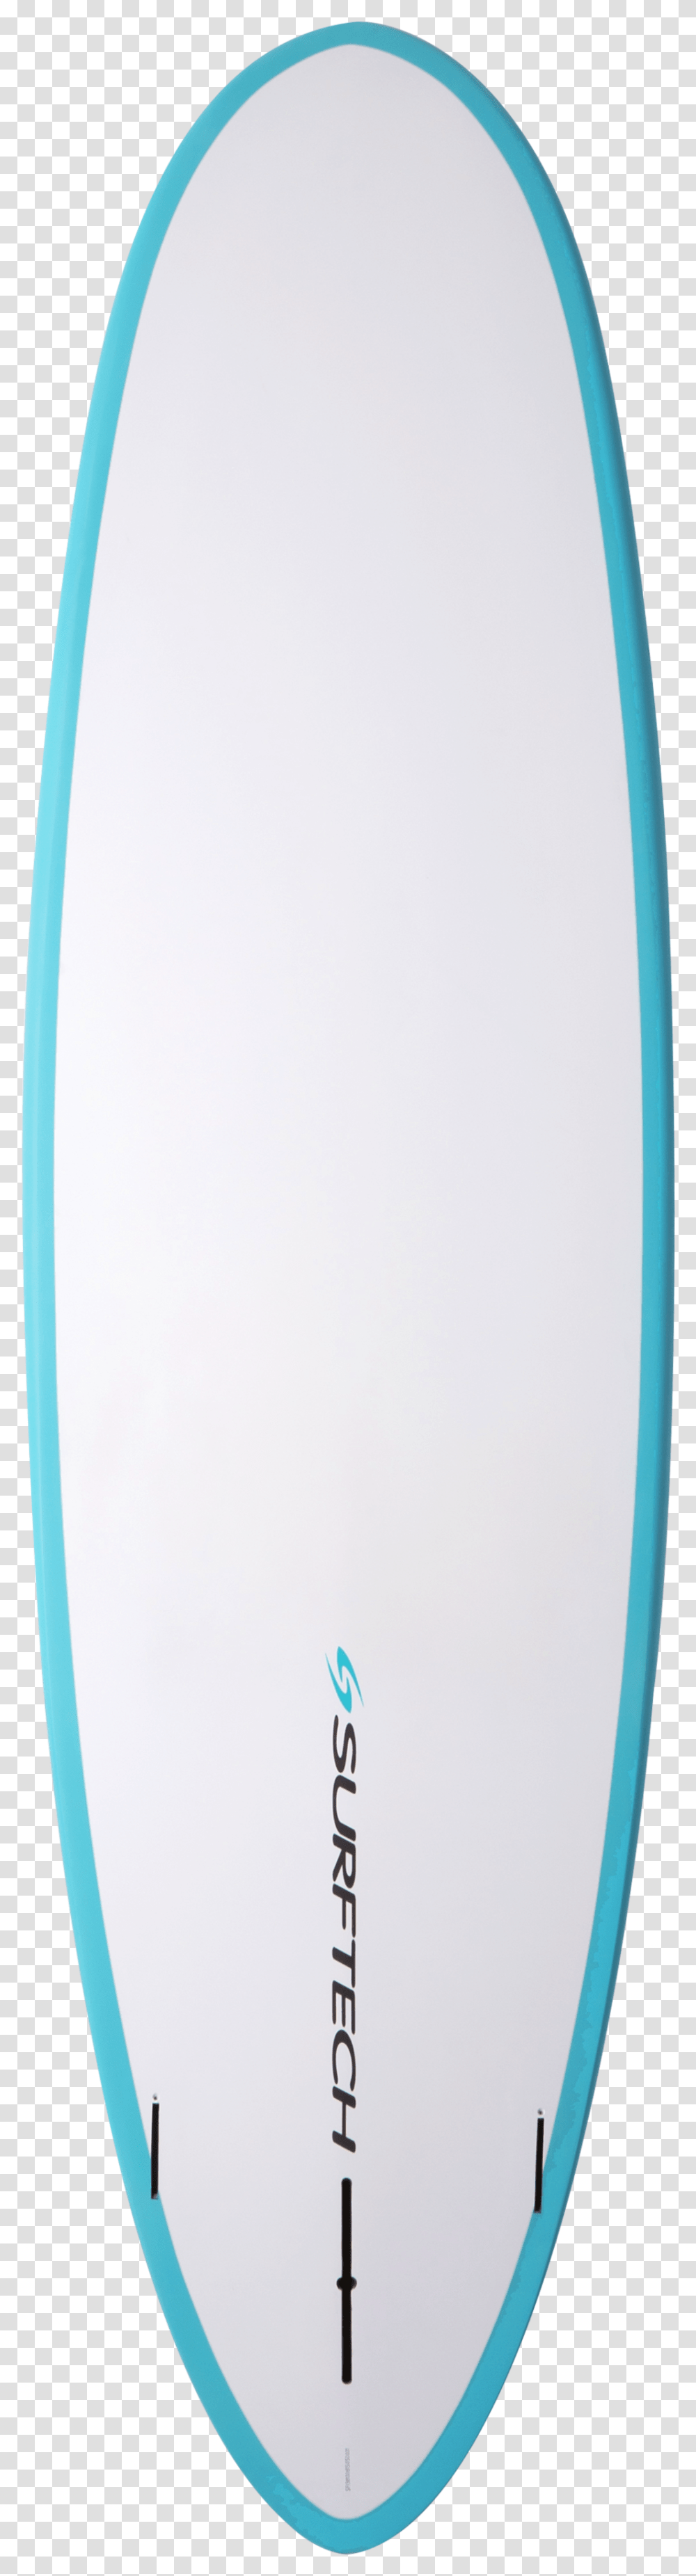 Generatorcoretech Blue Bottom Cable, White Board, Page, Skateboard Transparent Png